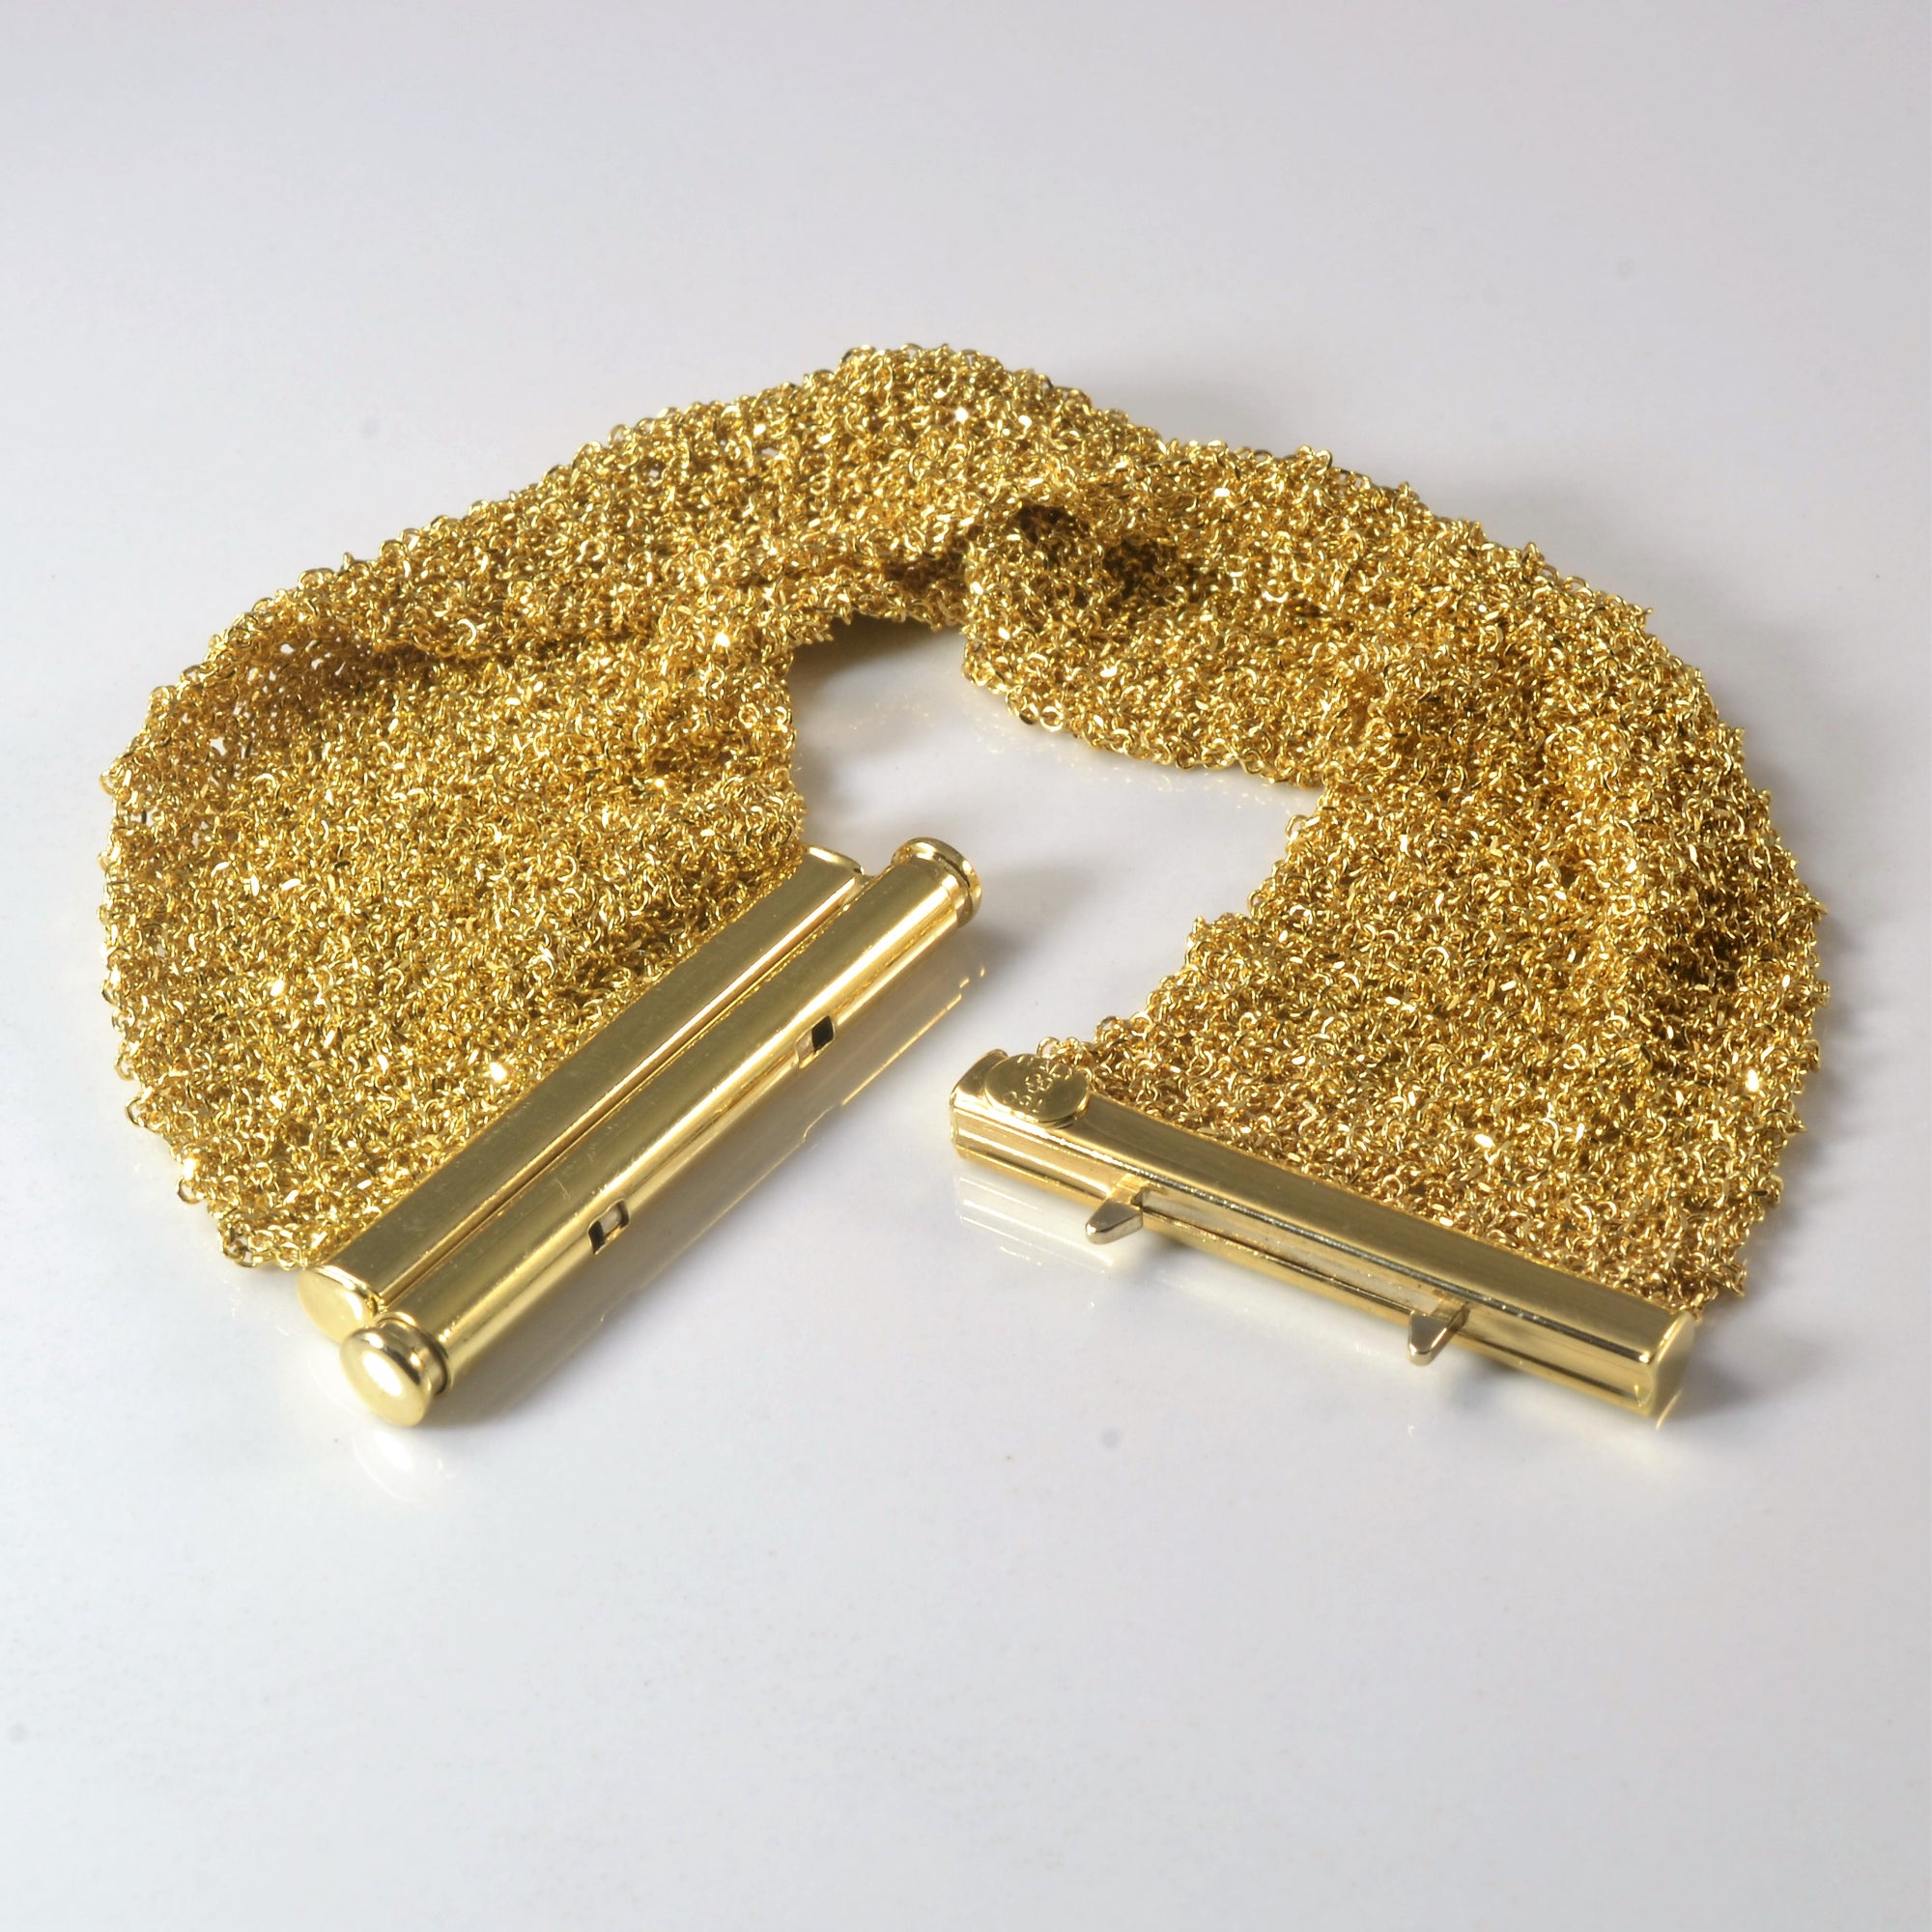 18k Woven Yellow Gold Jewellery Suite | 235.15 grams